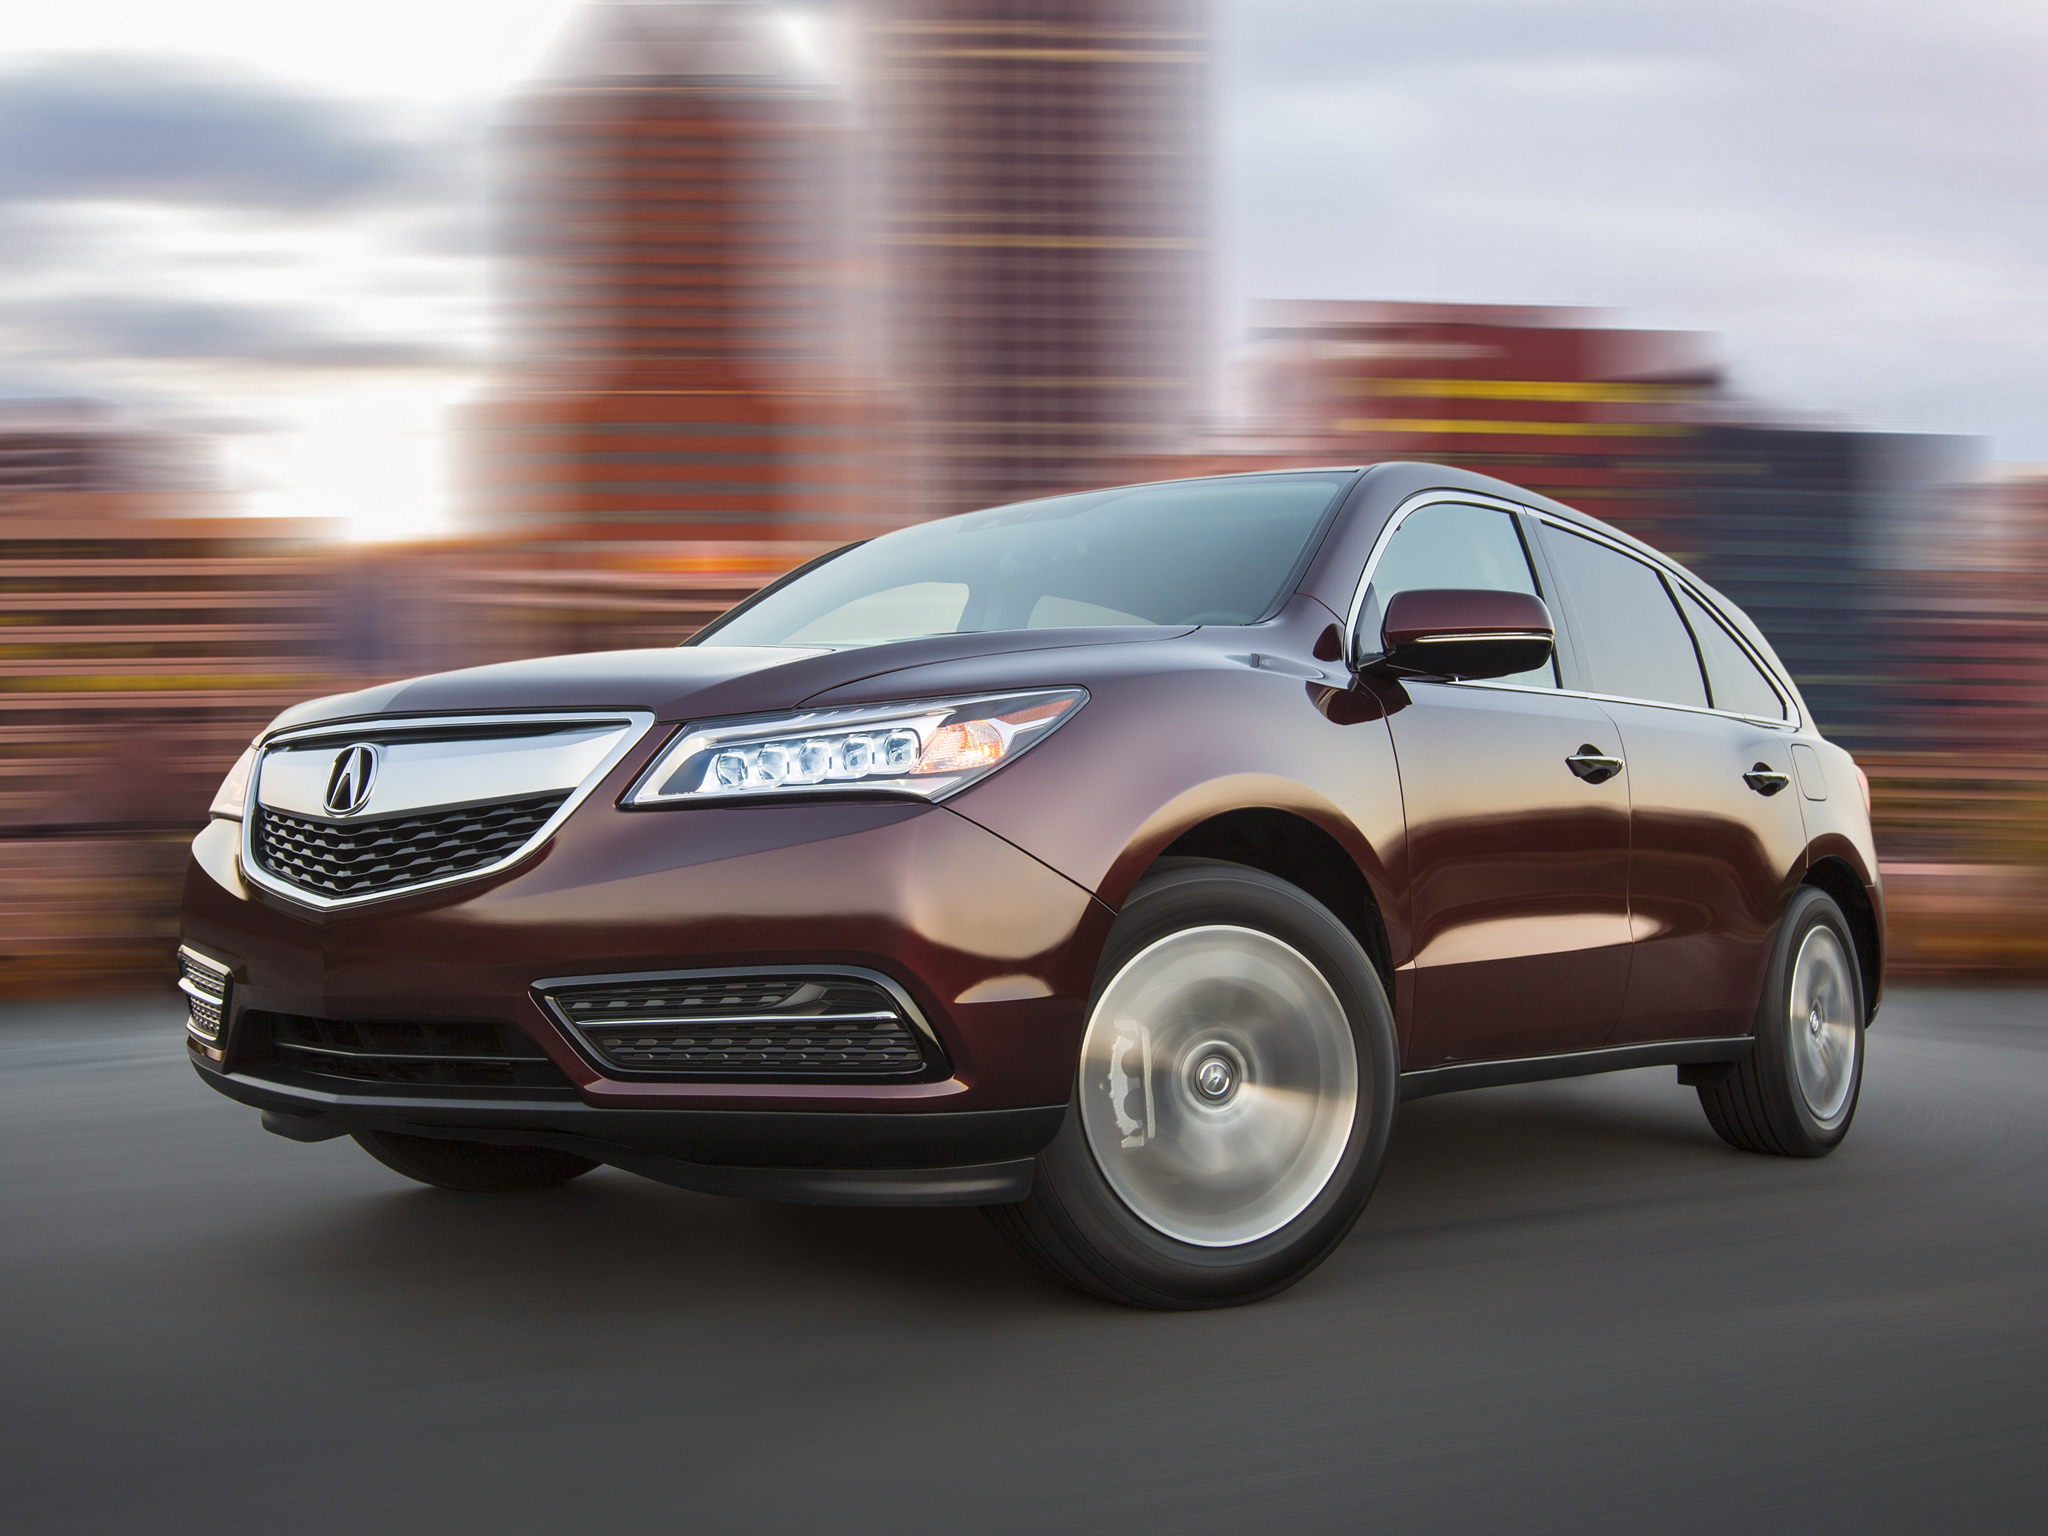 Acura Mdx Wallpaper Cool Cars